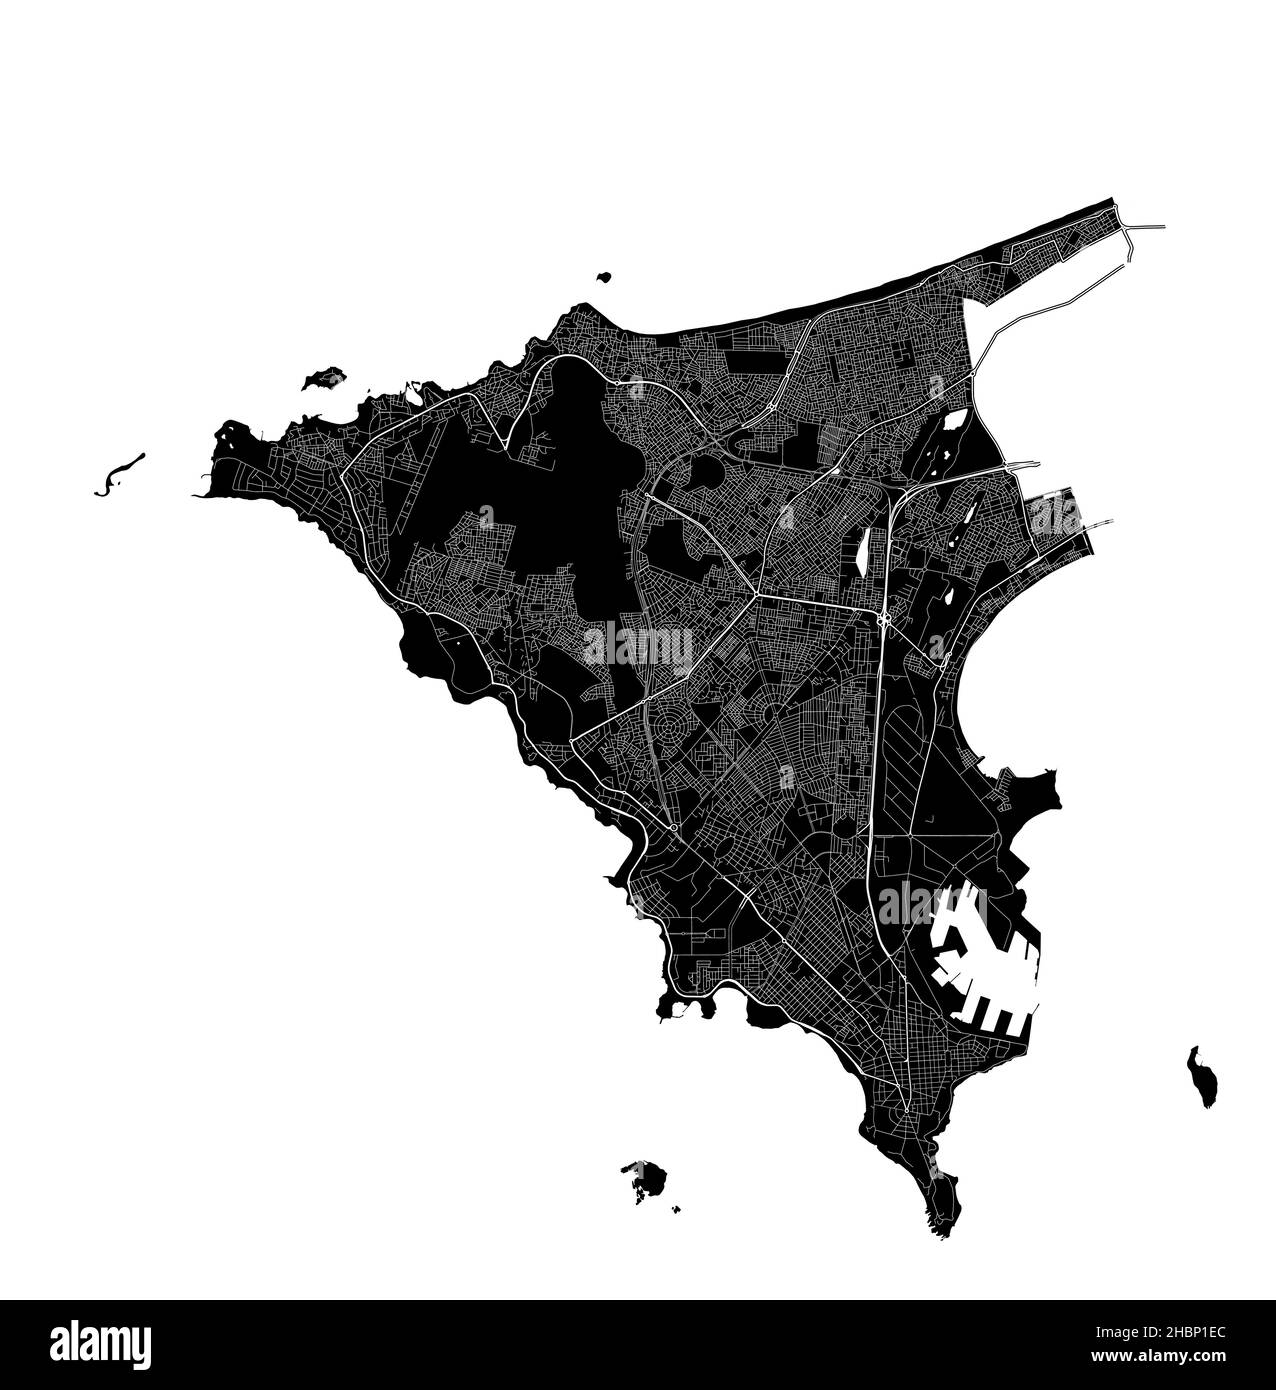 Dakar, Senegal, high resolution vector map with city boundaries, and editable paths. The city map was drawn with white areas and lines for main roads, Stock Vector